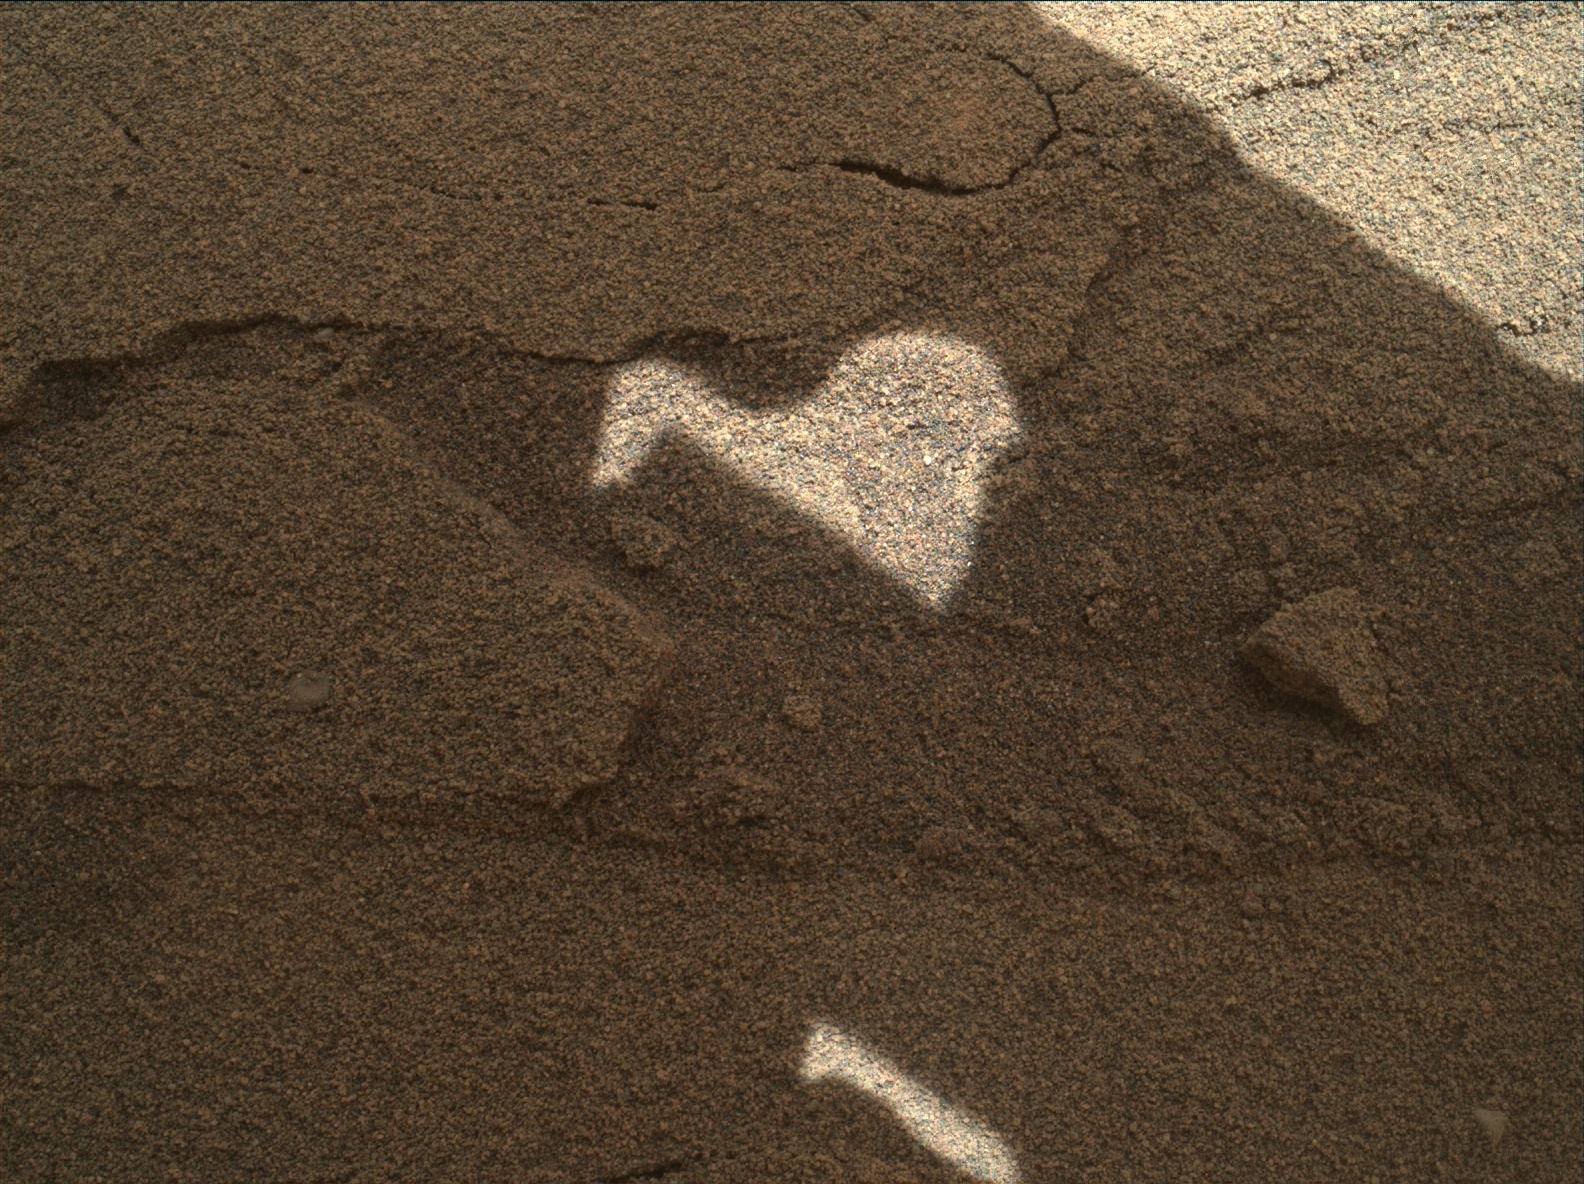 Nasa's Mars rover Curiosity acquired this image using its Mars Hand Lens Imager (MAHLI) on Sol 584